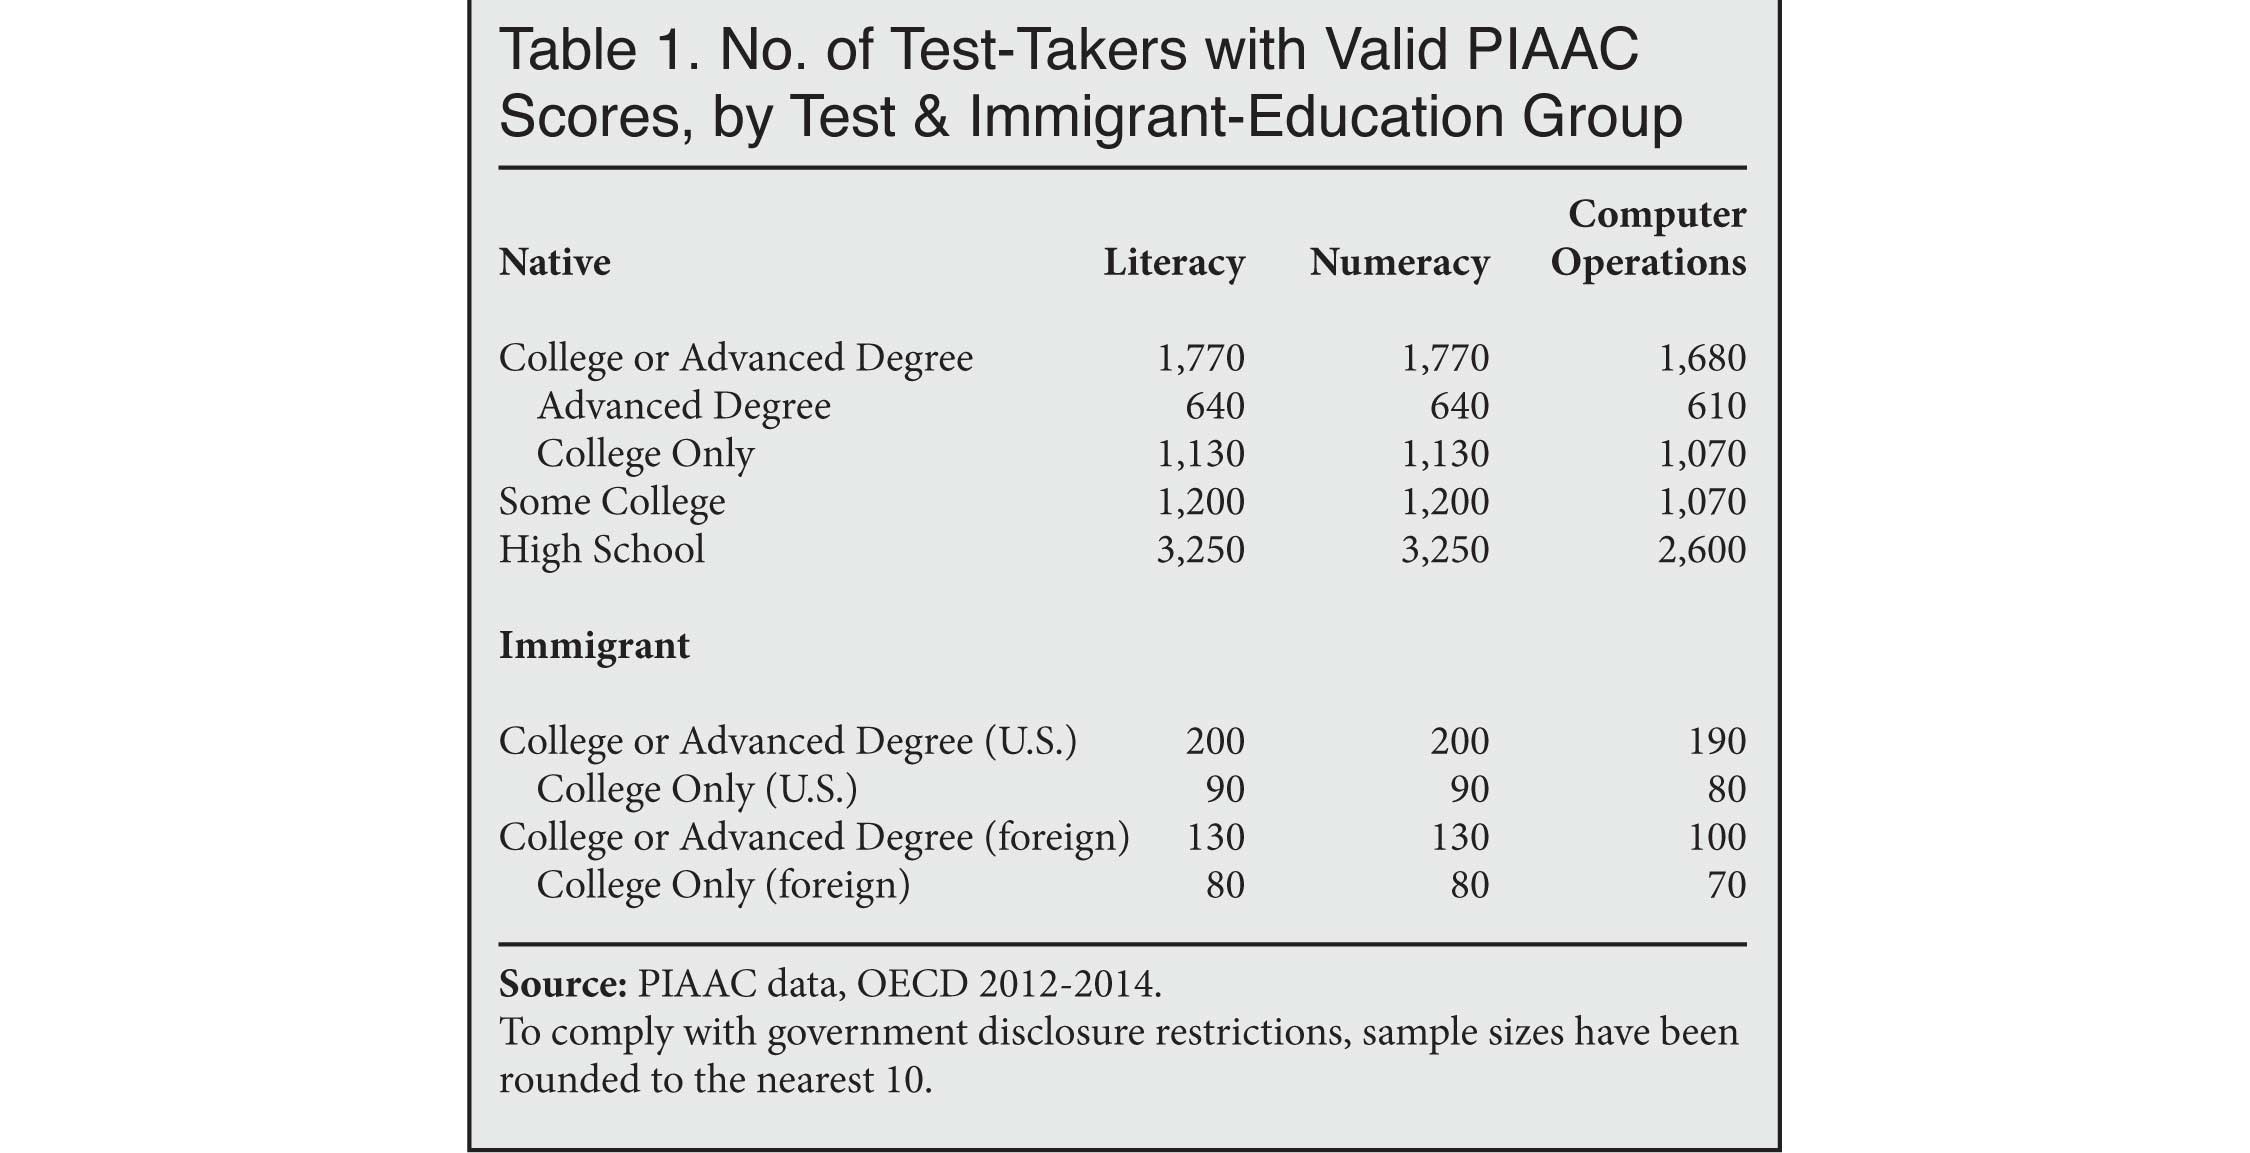 Table: Number of Test Takers with Valid PIAAC Scores, by Test and Immigrant Education Group